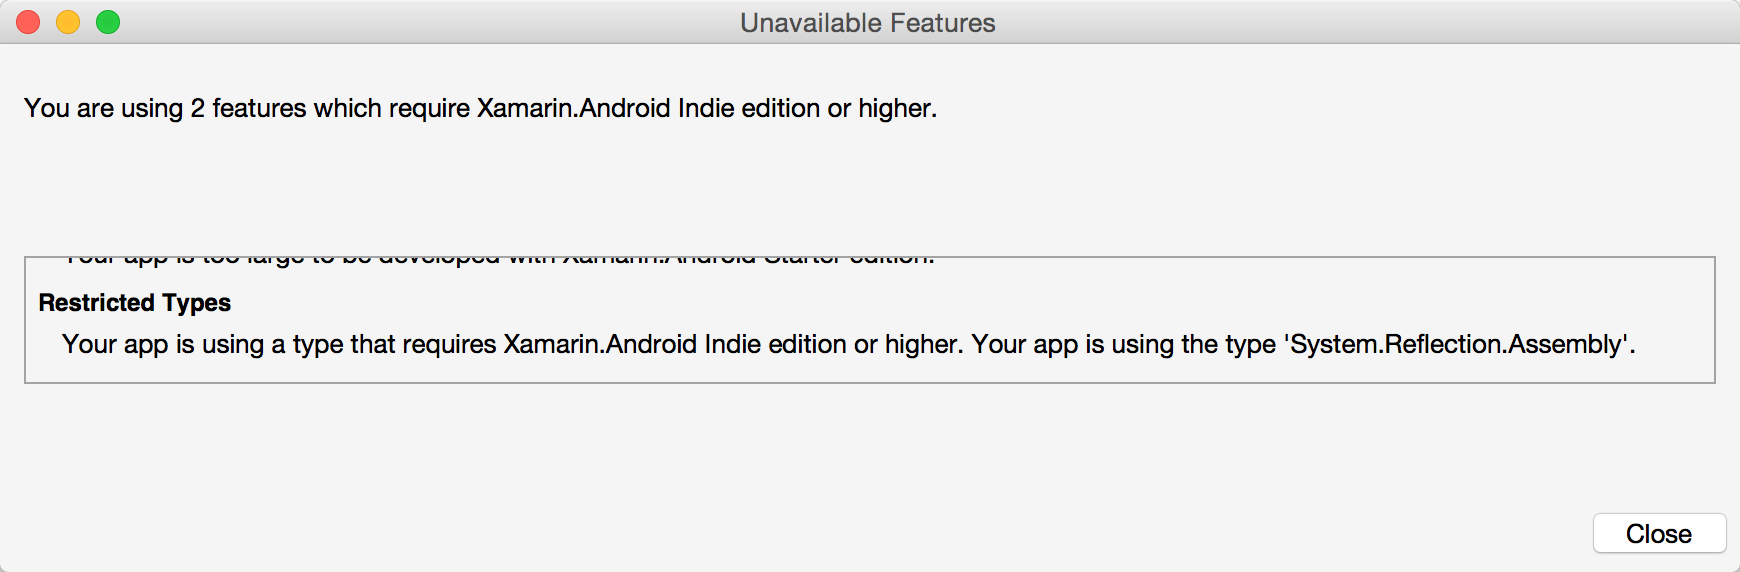 xamarin_navailable_features.png